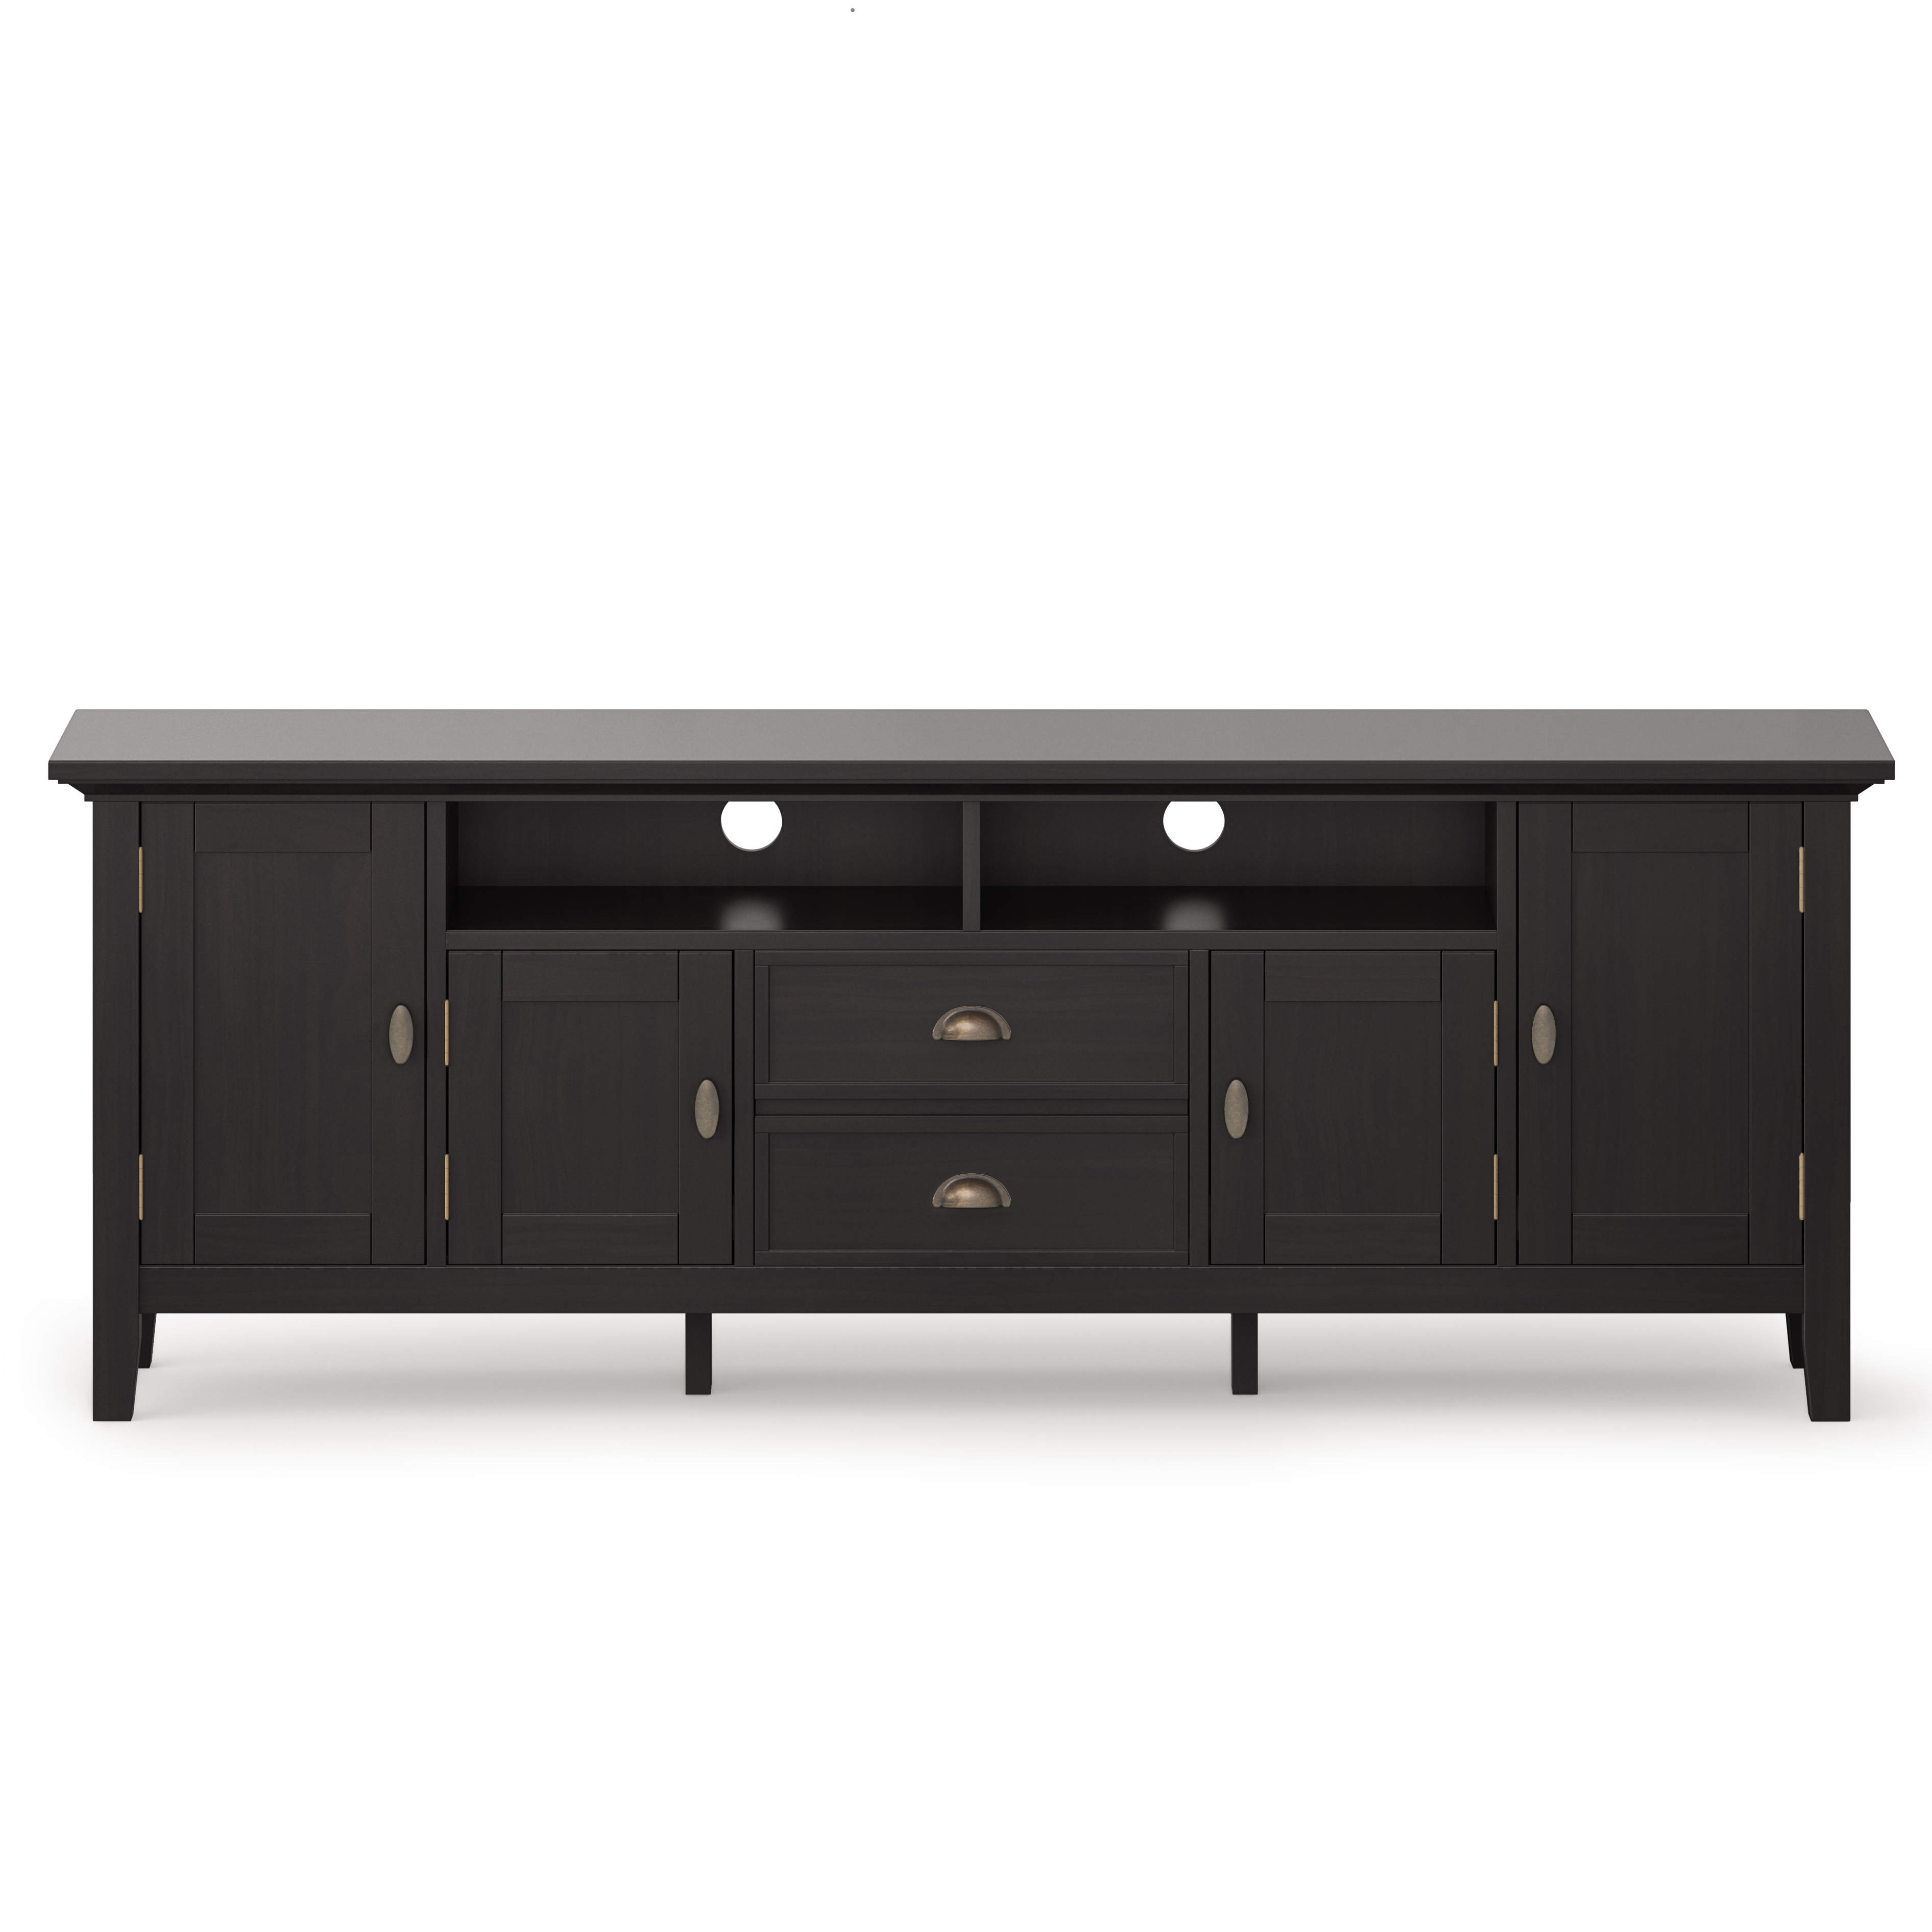 Simpli Home Redmond SOLID WOOD 72 inch TV Media Stand in Hickory Brown For TVs up to 80 inches